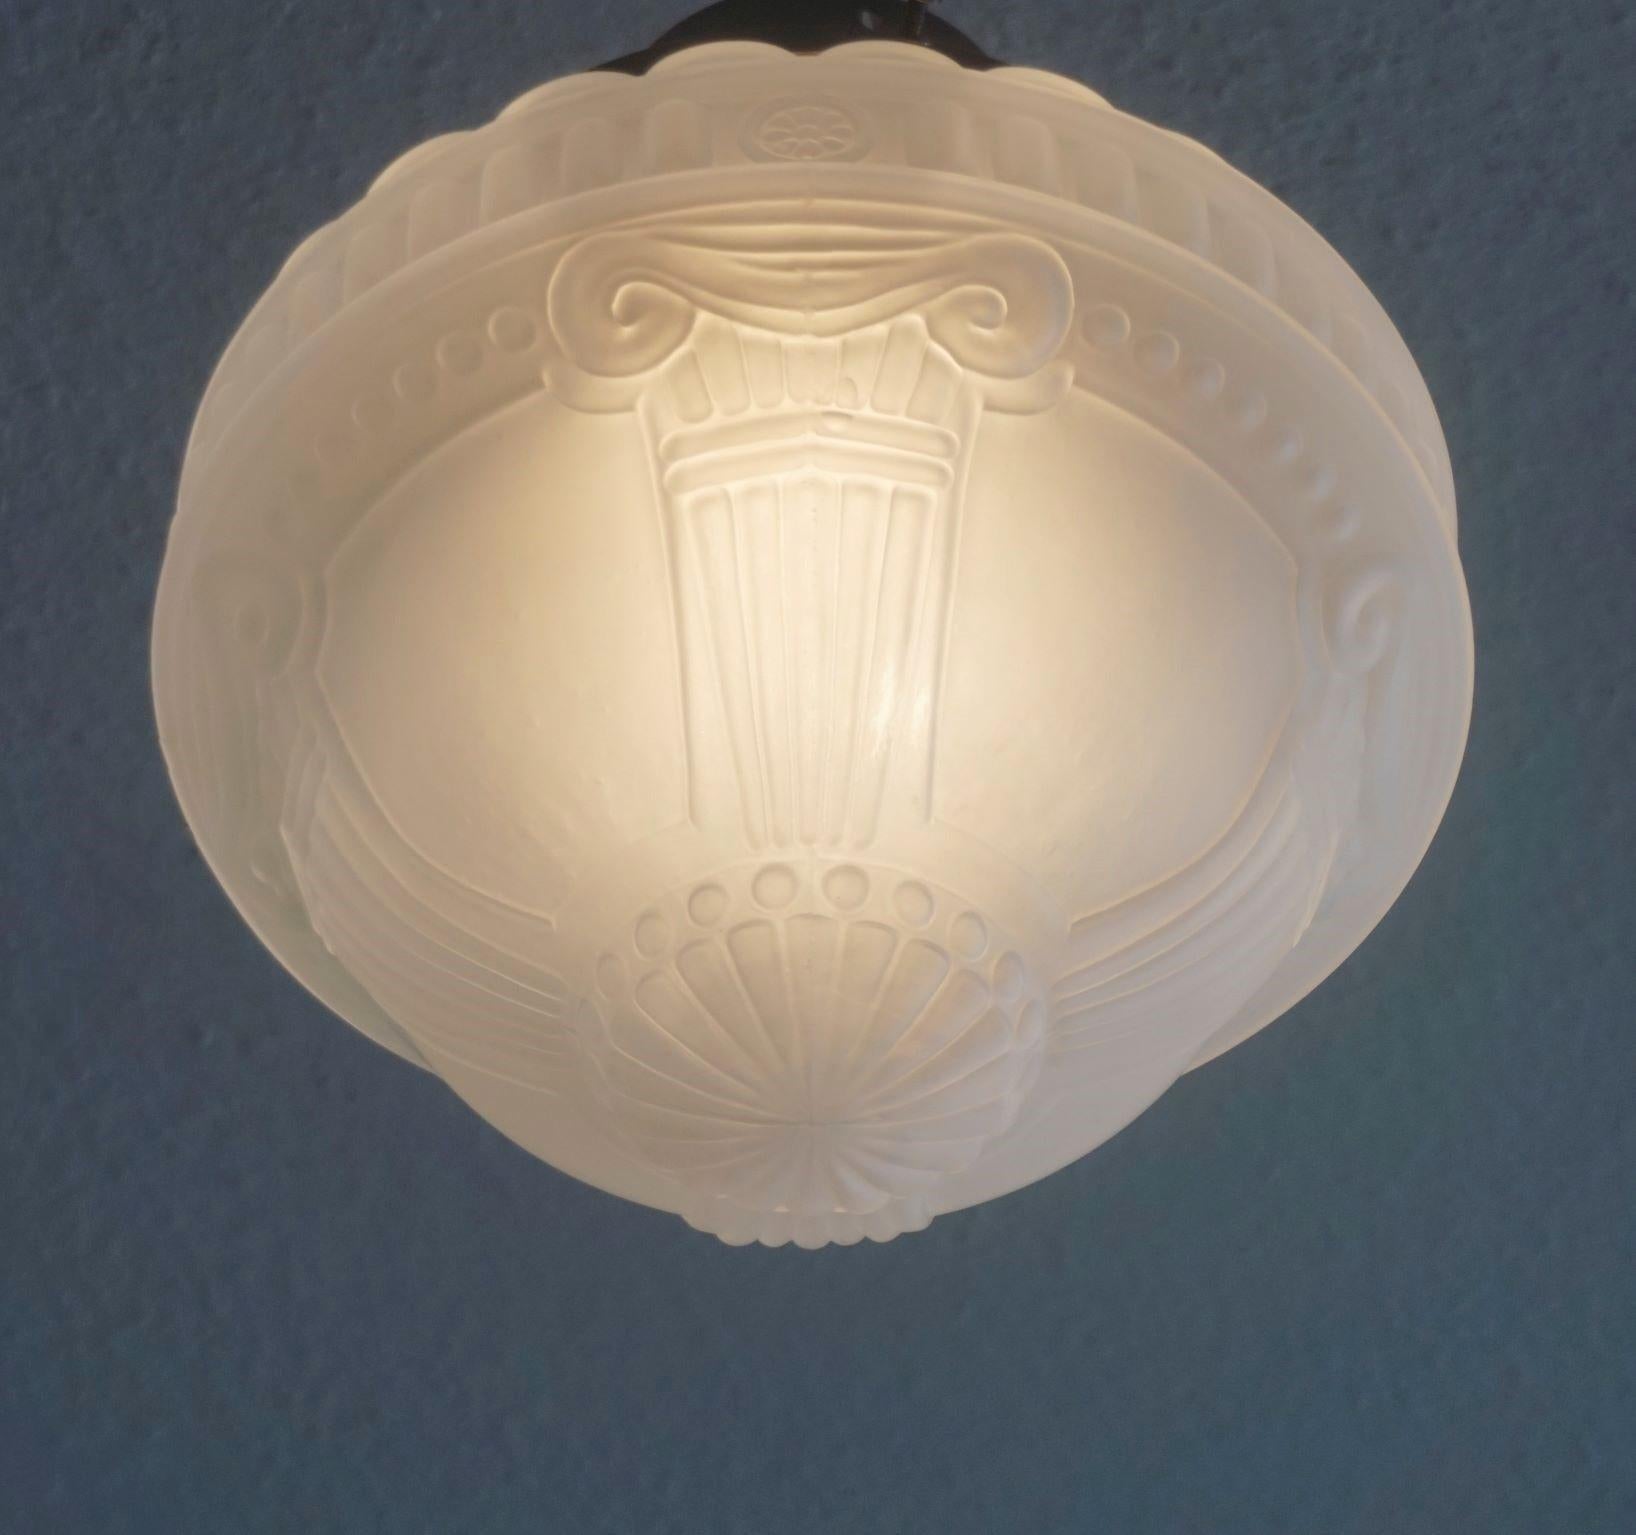 French Art Deco Frosted High Relief Glass Two-Light Ceiling Light Fixture, 1930s For Sale 6